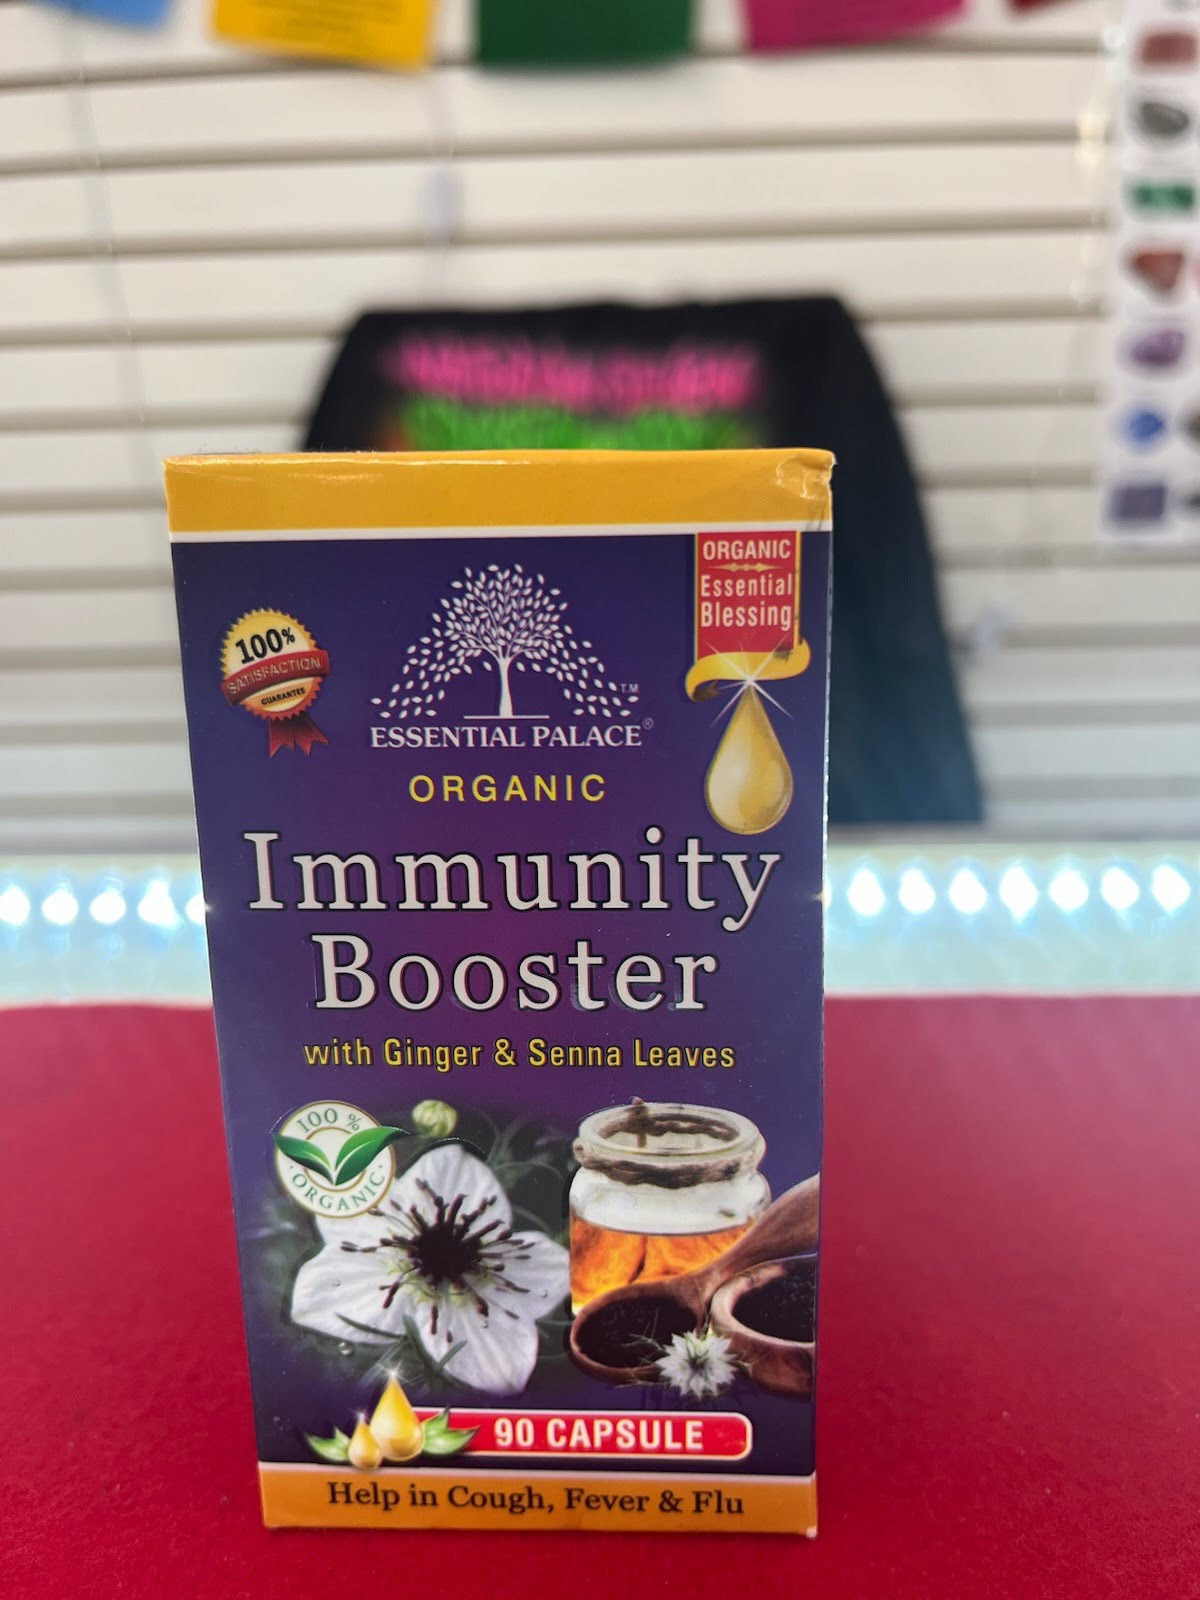 A box of organic immunity booster with ginger and fennel leaves.